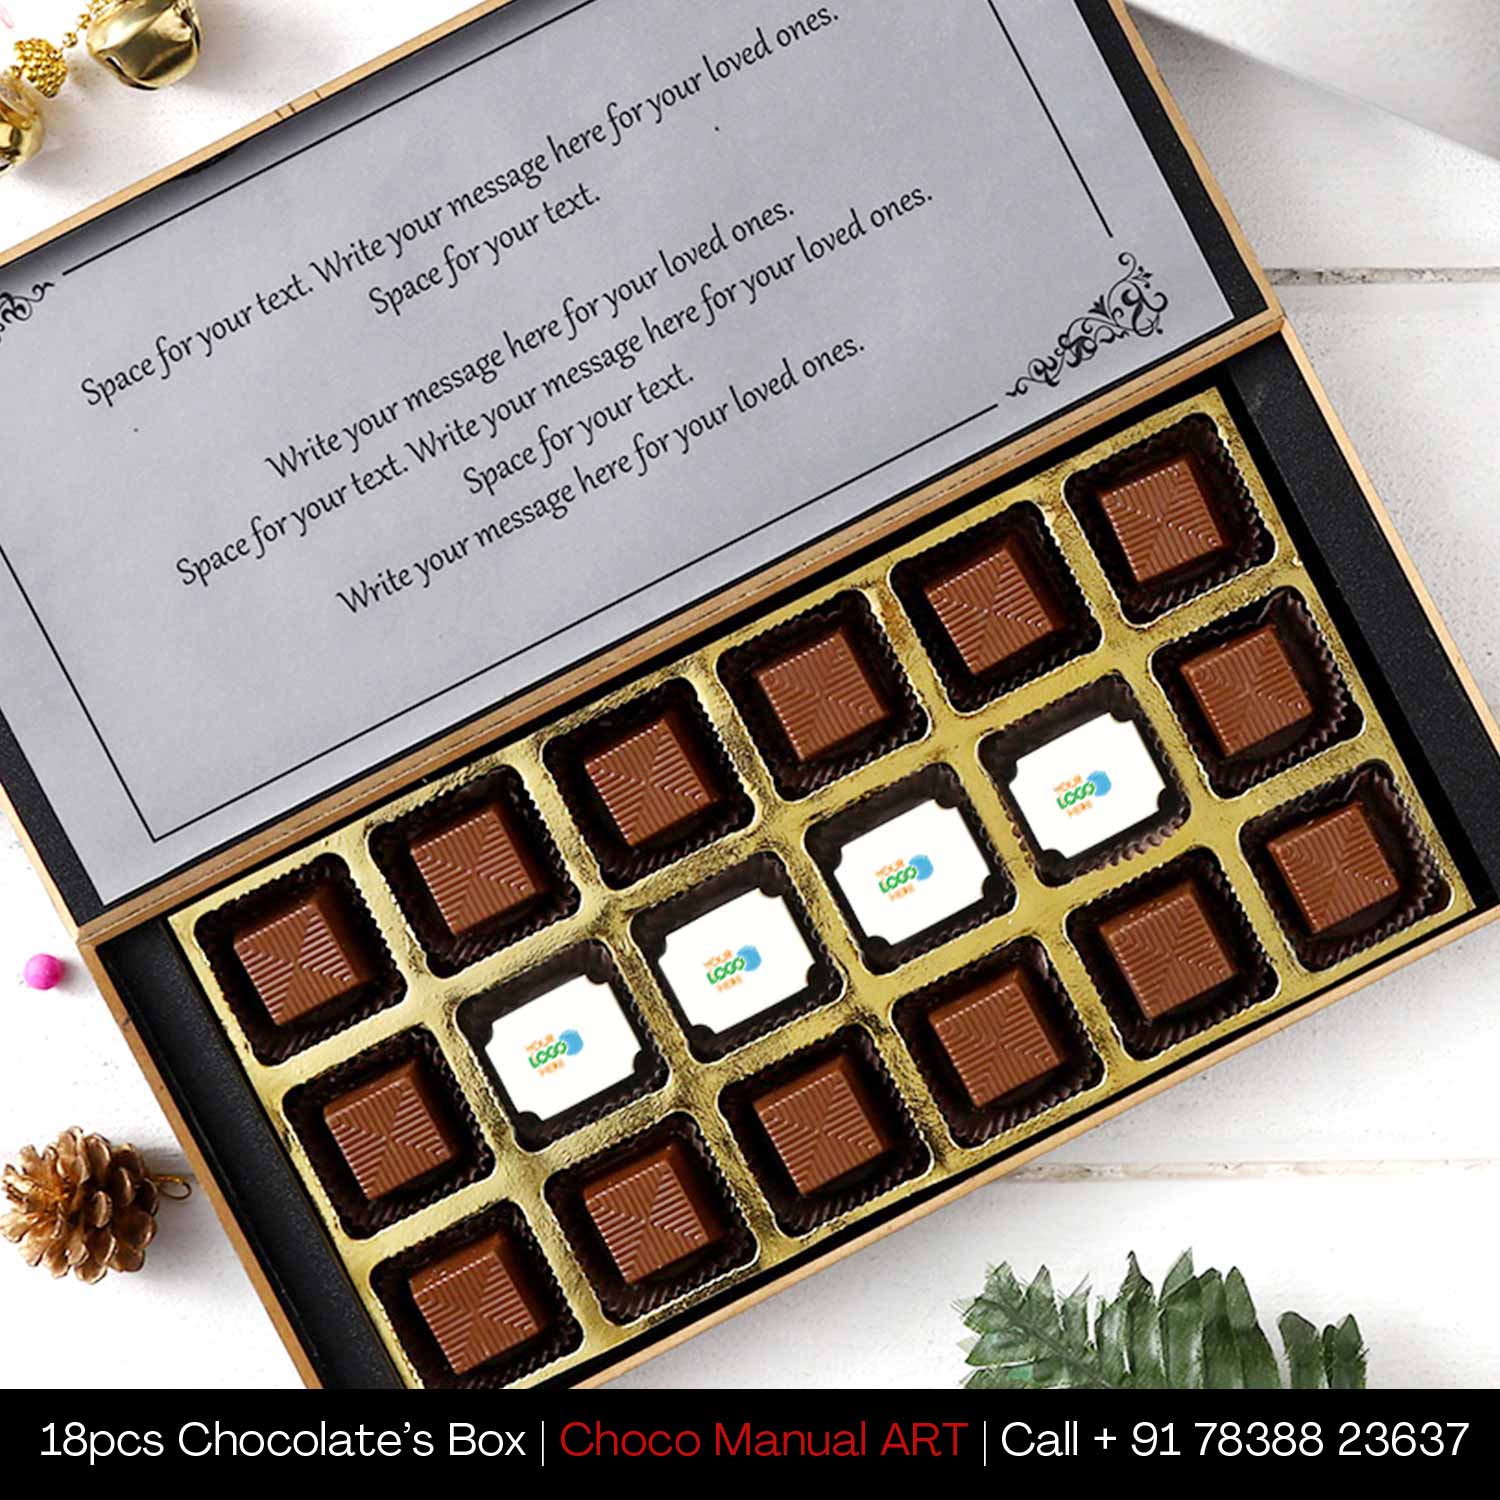 New Year Corporate Chocolate Gifts Online For Employees, Clients